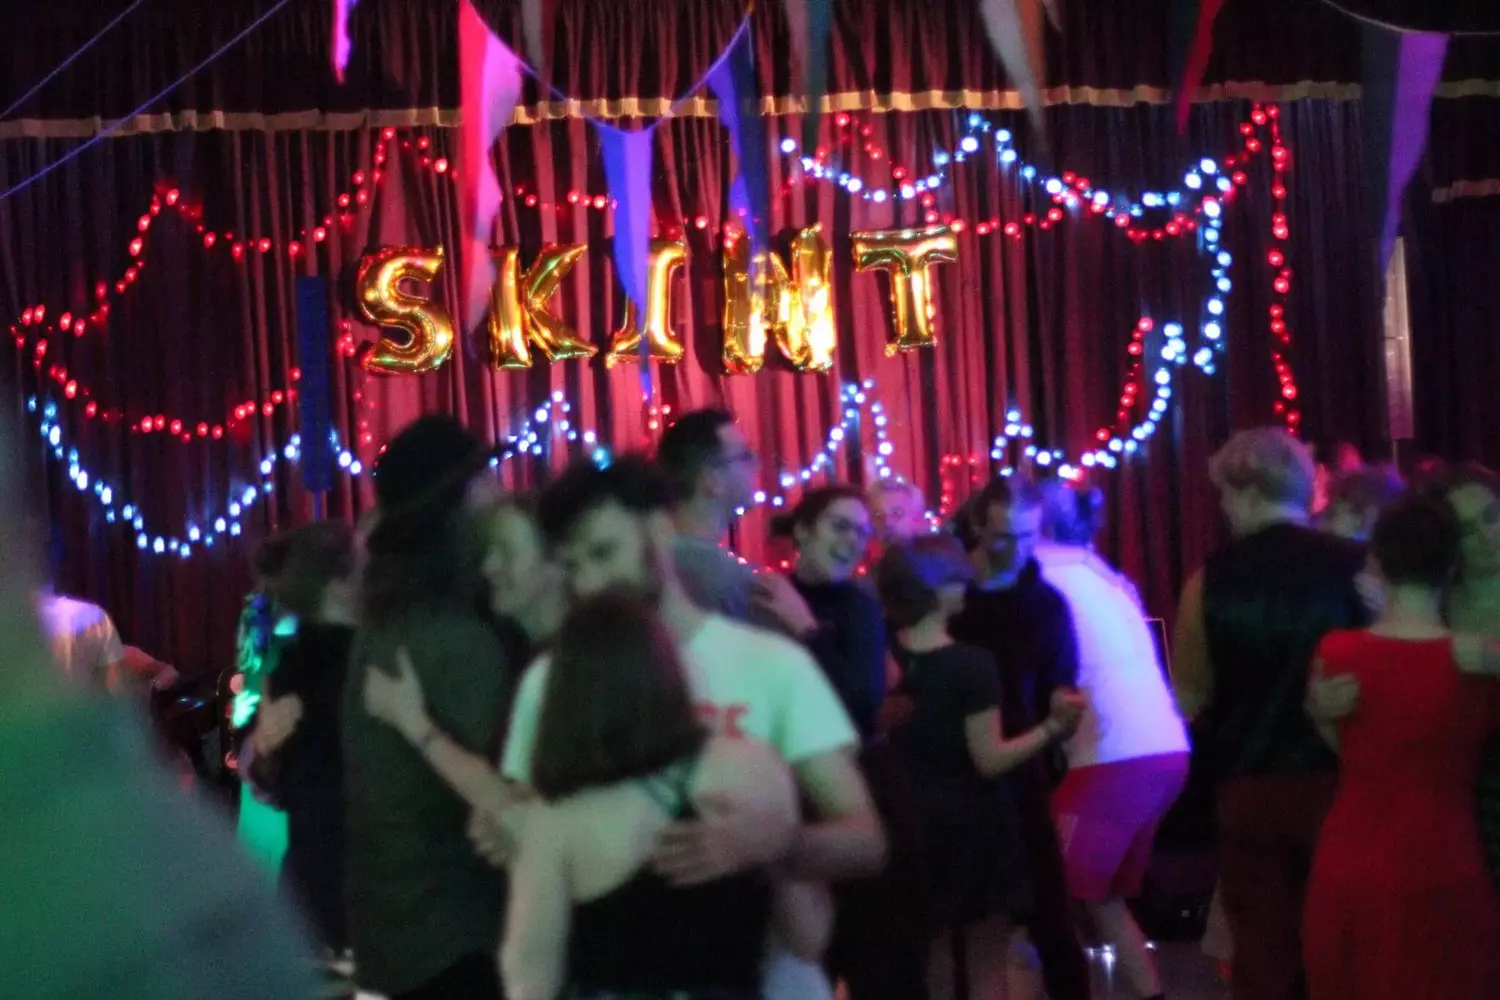 Couples dancing at a bal. There are fairy lights and banners, and large balloon letters spelling Skint